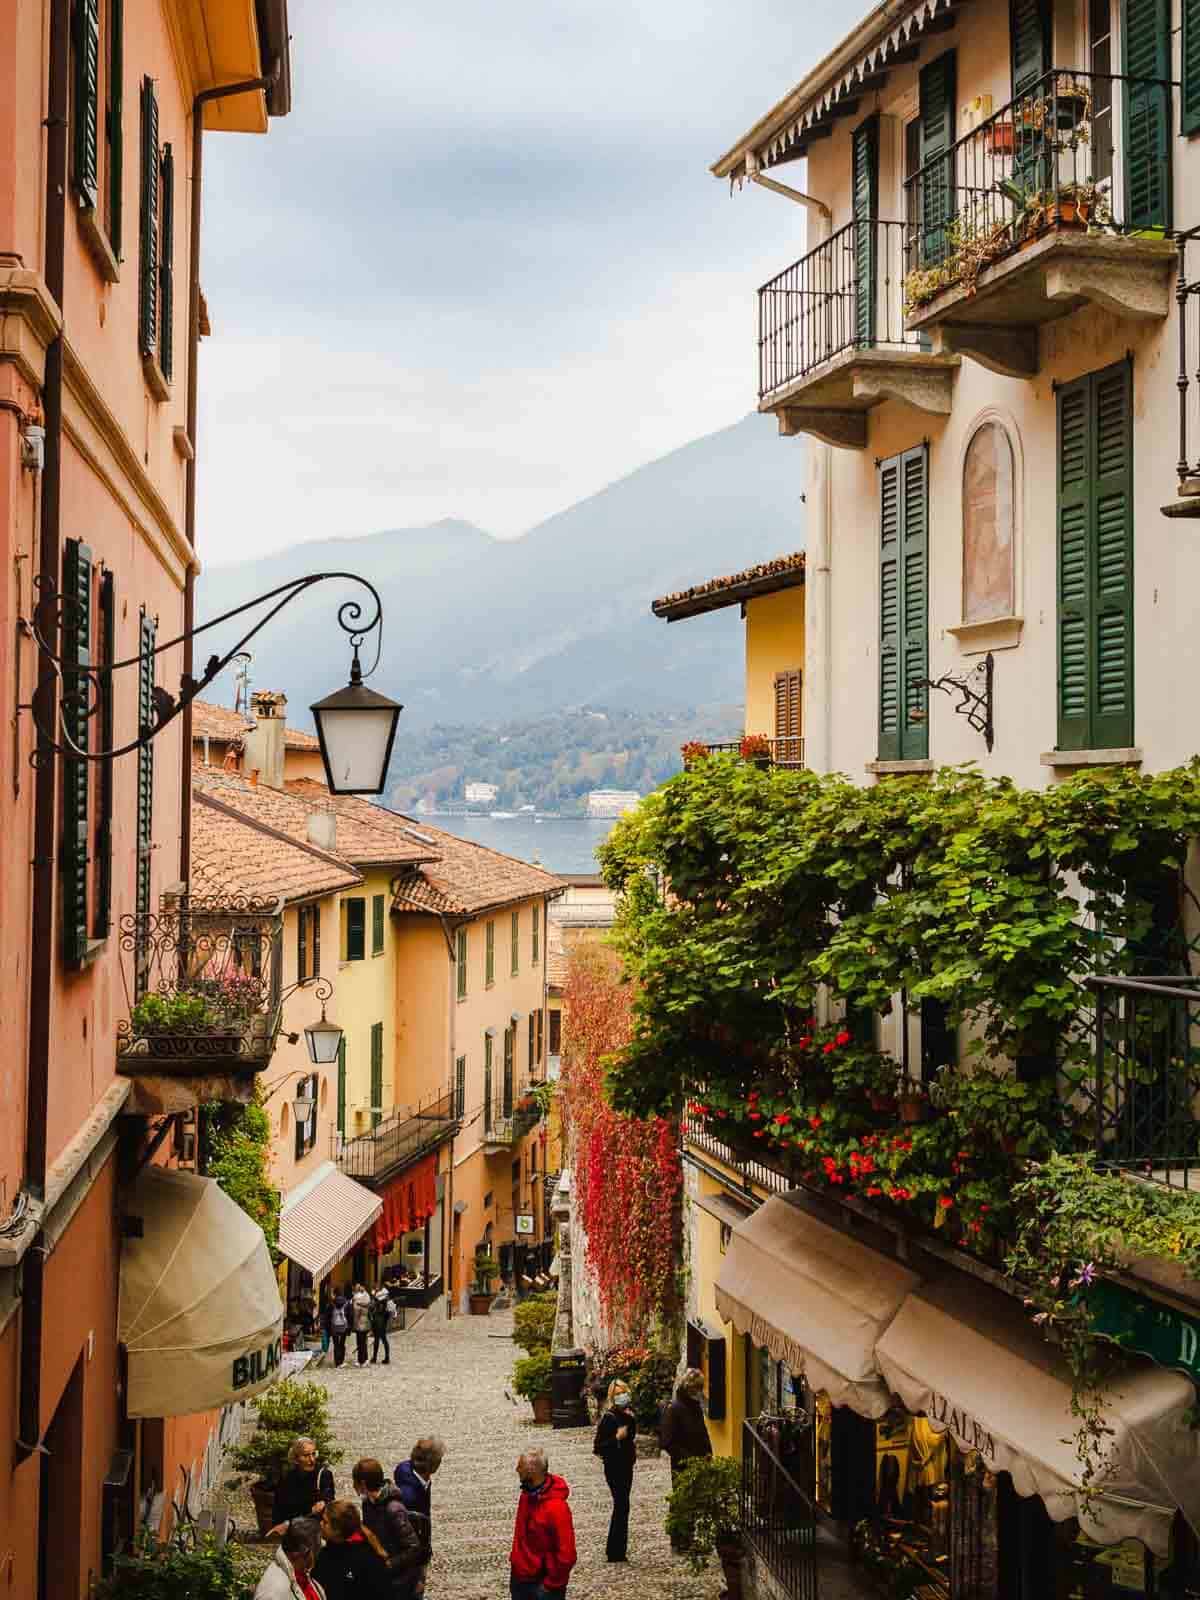 strolling the narrow and colorful streets of Belaggio in Lake Como Italy.